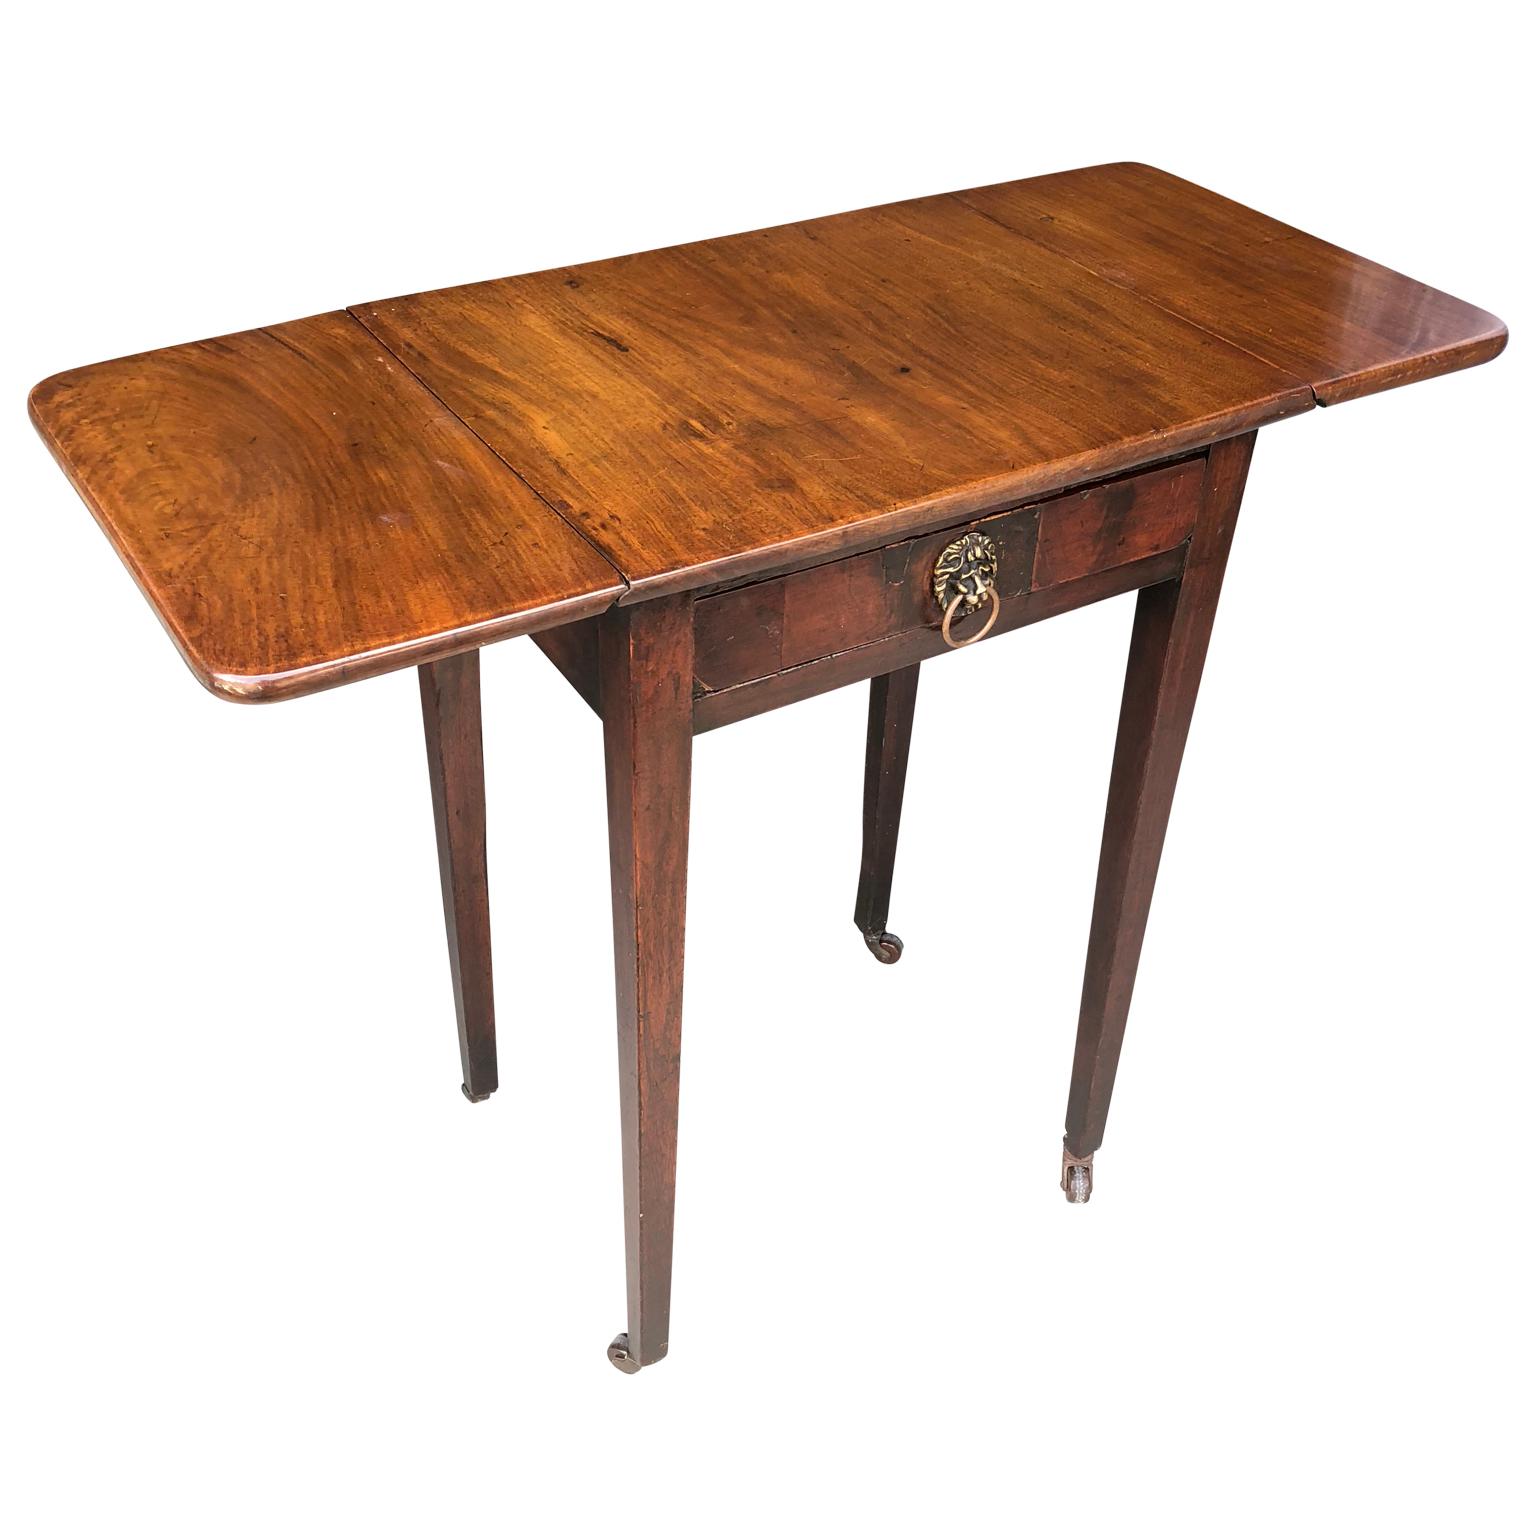 Classic Regency style drop-leaf table with lion-head hardware.
Full width including both drop-leaves is 36 inches.

 